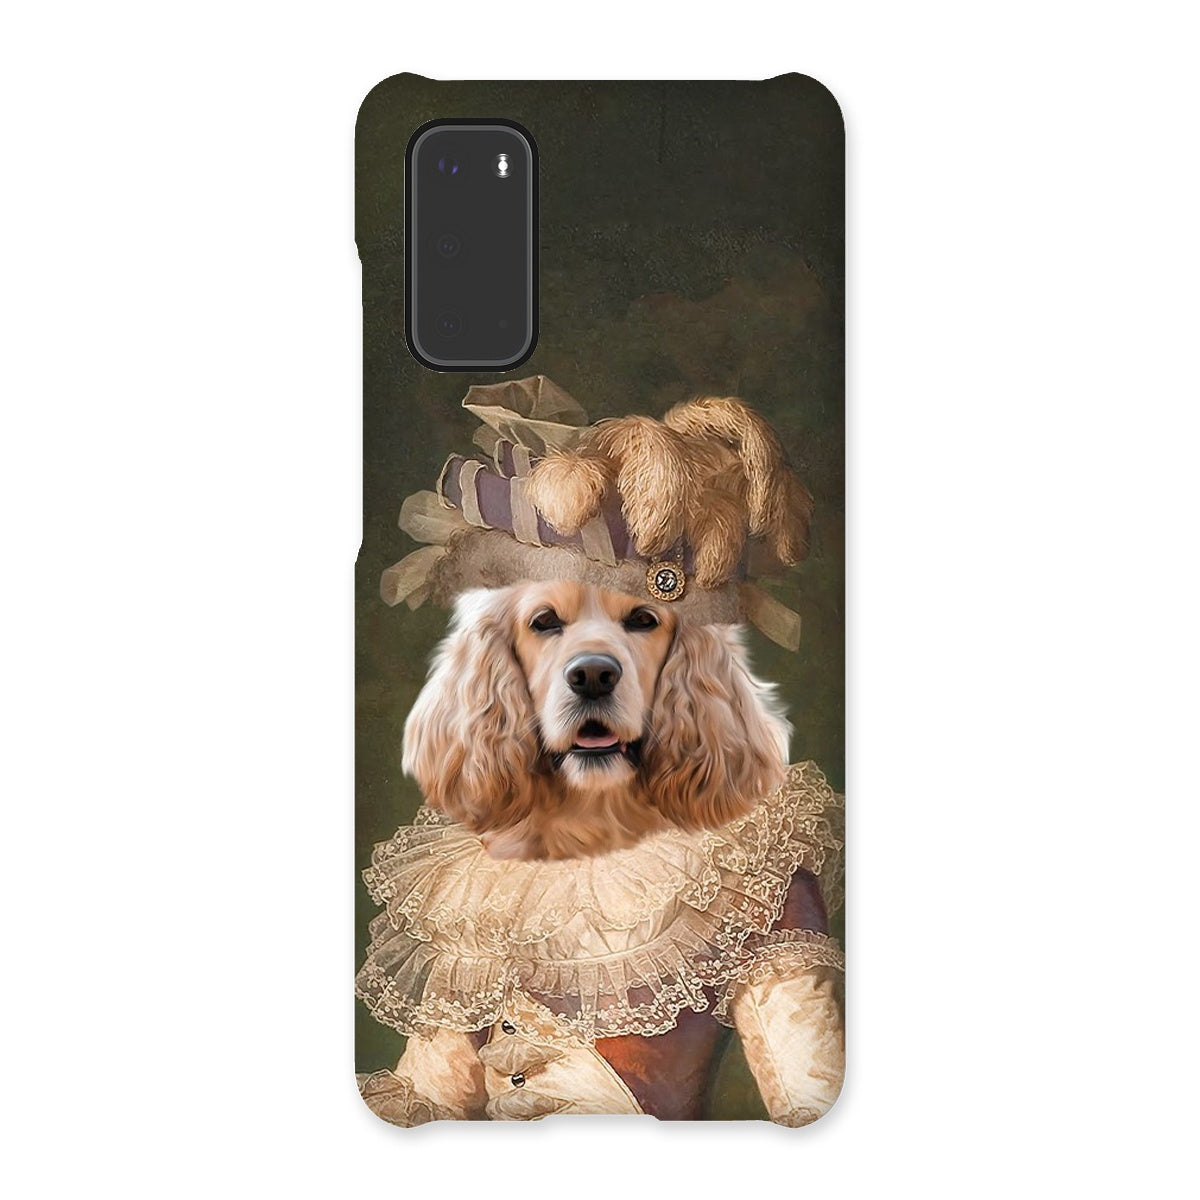 Marie Antoinette: Custom Pet Phone Case, Paw & Glory,paw and glory, professional pet photos, paintings of pets, dog caricatures, pets portrait, pet portraits paintings Pet portraits uk,